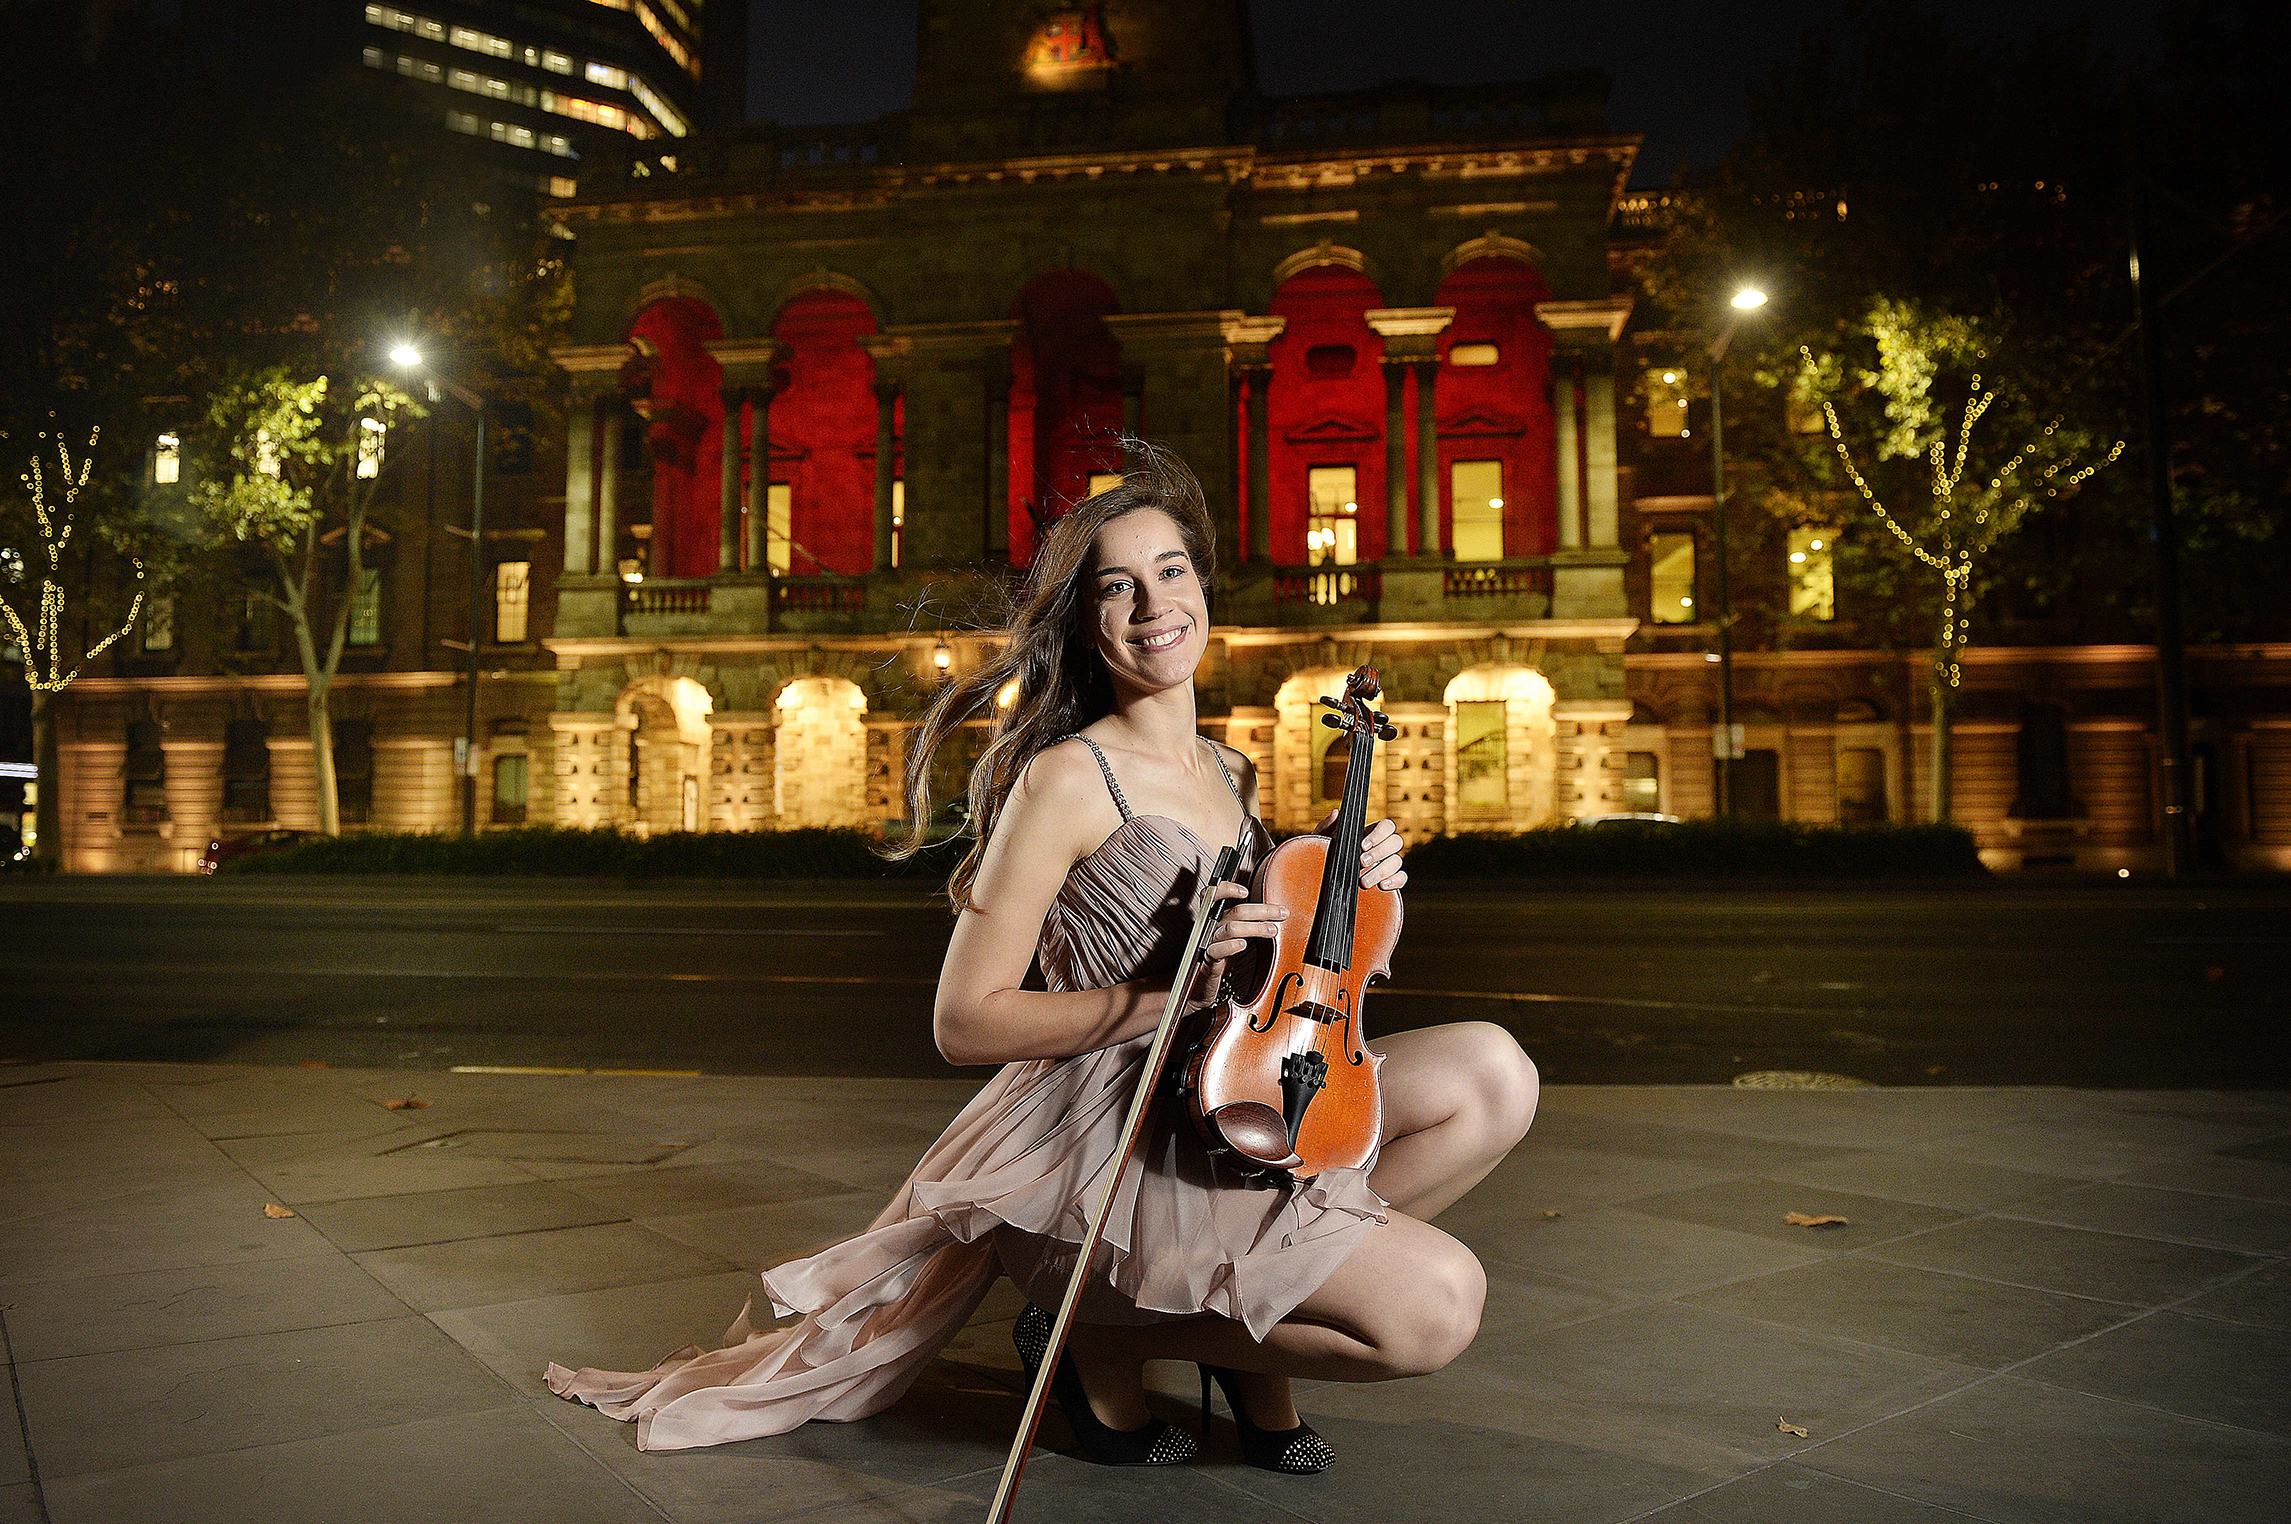  2.5.16 - 21 year old violinist Juliana Bollela will be part of the celebrations as the Adelaide Youth Orchestra celebrates the 150th anniversary of Adelaide Town Hall. (The Advertiser, News Corp Australia) 